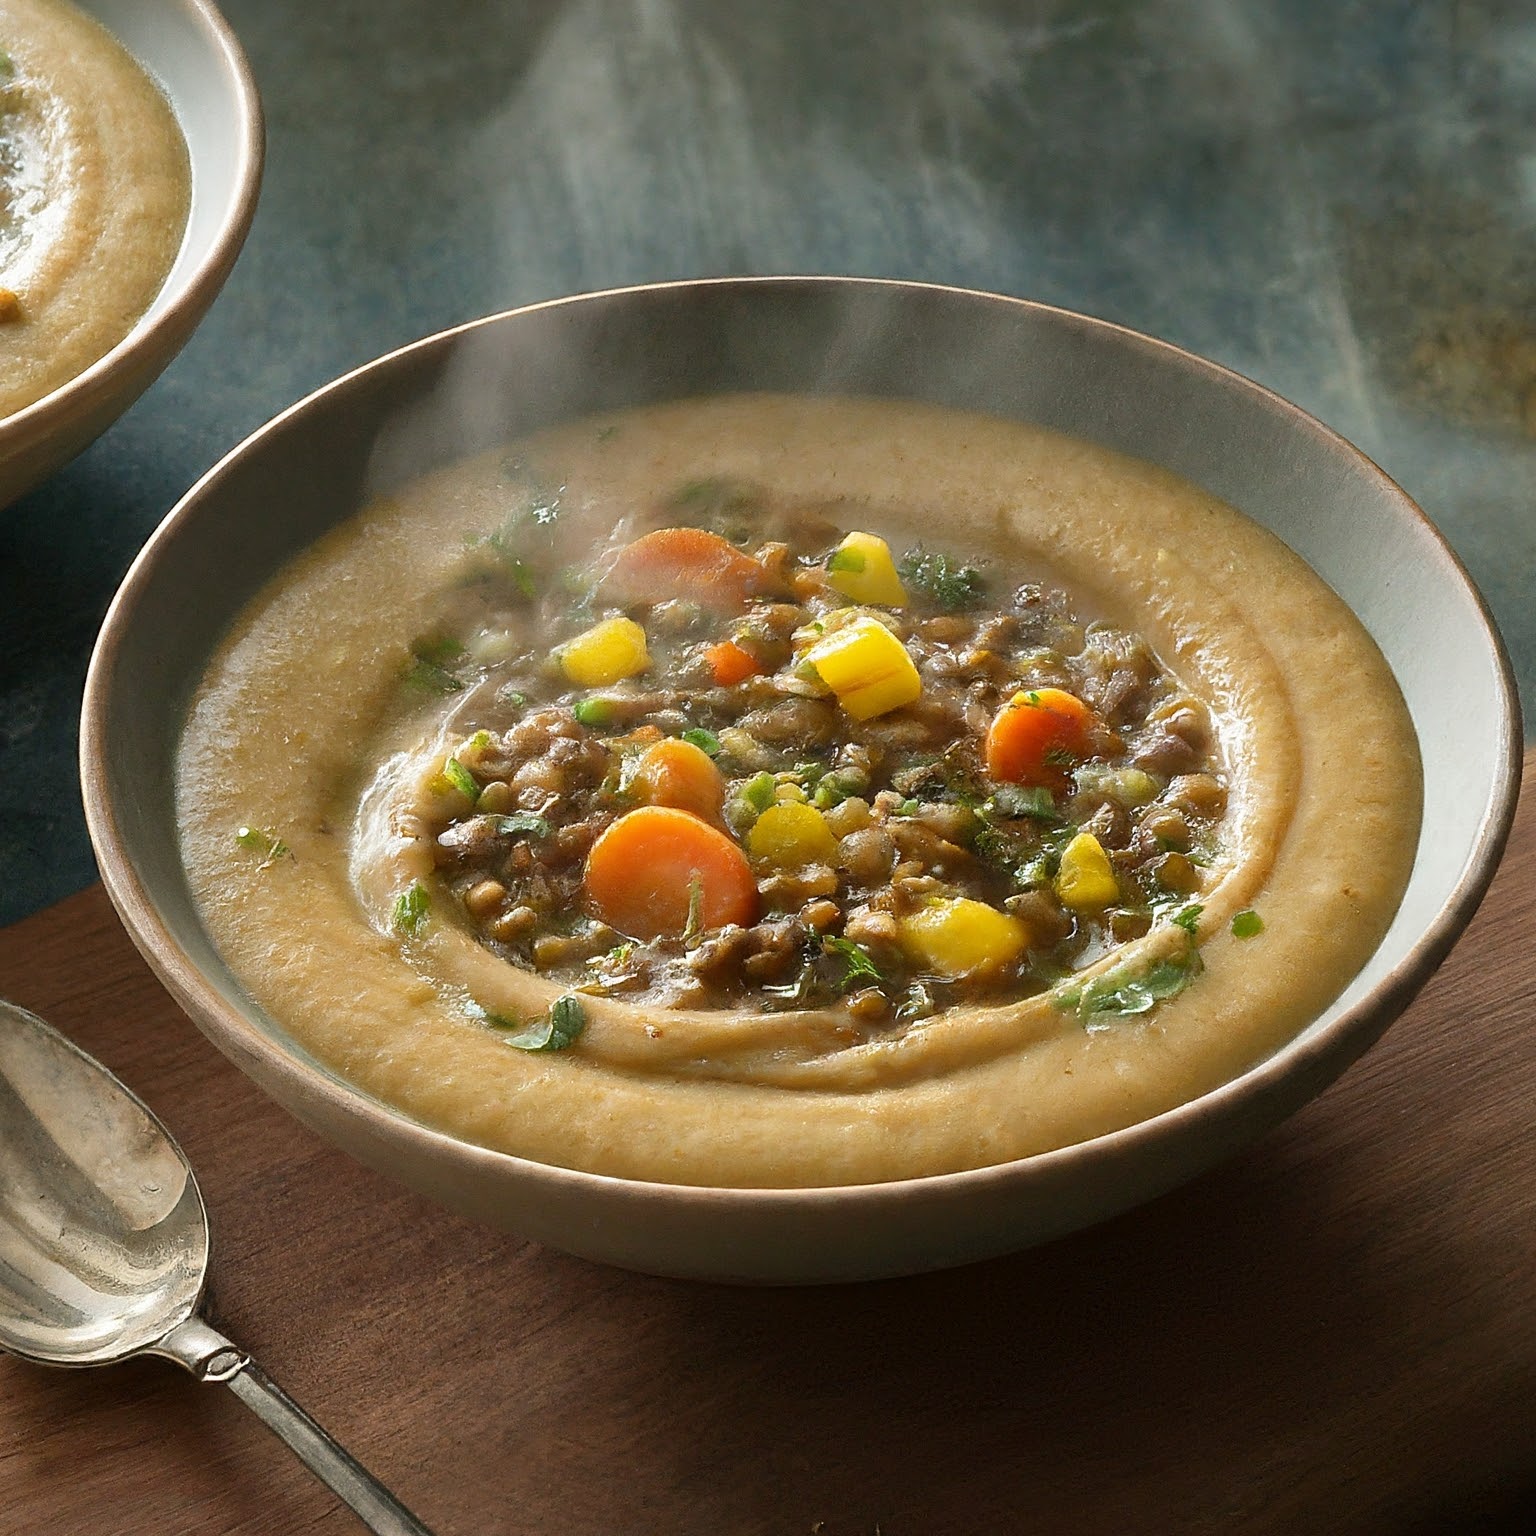 A steaming bowl of Hearty Millet and Lentil Soup with vegetables, herbs, and olive oil.